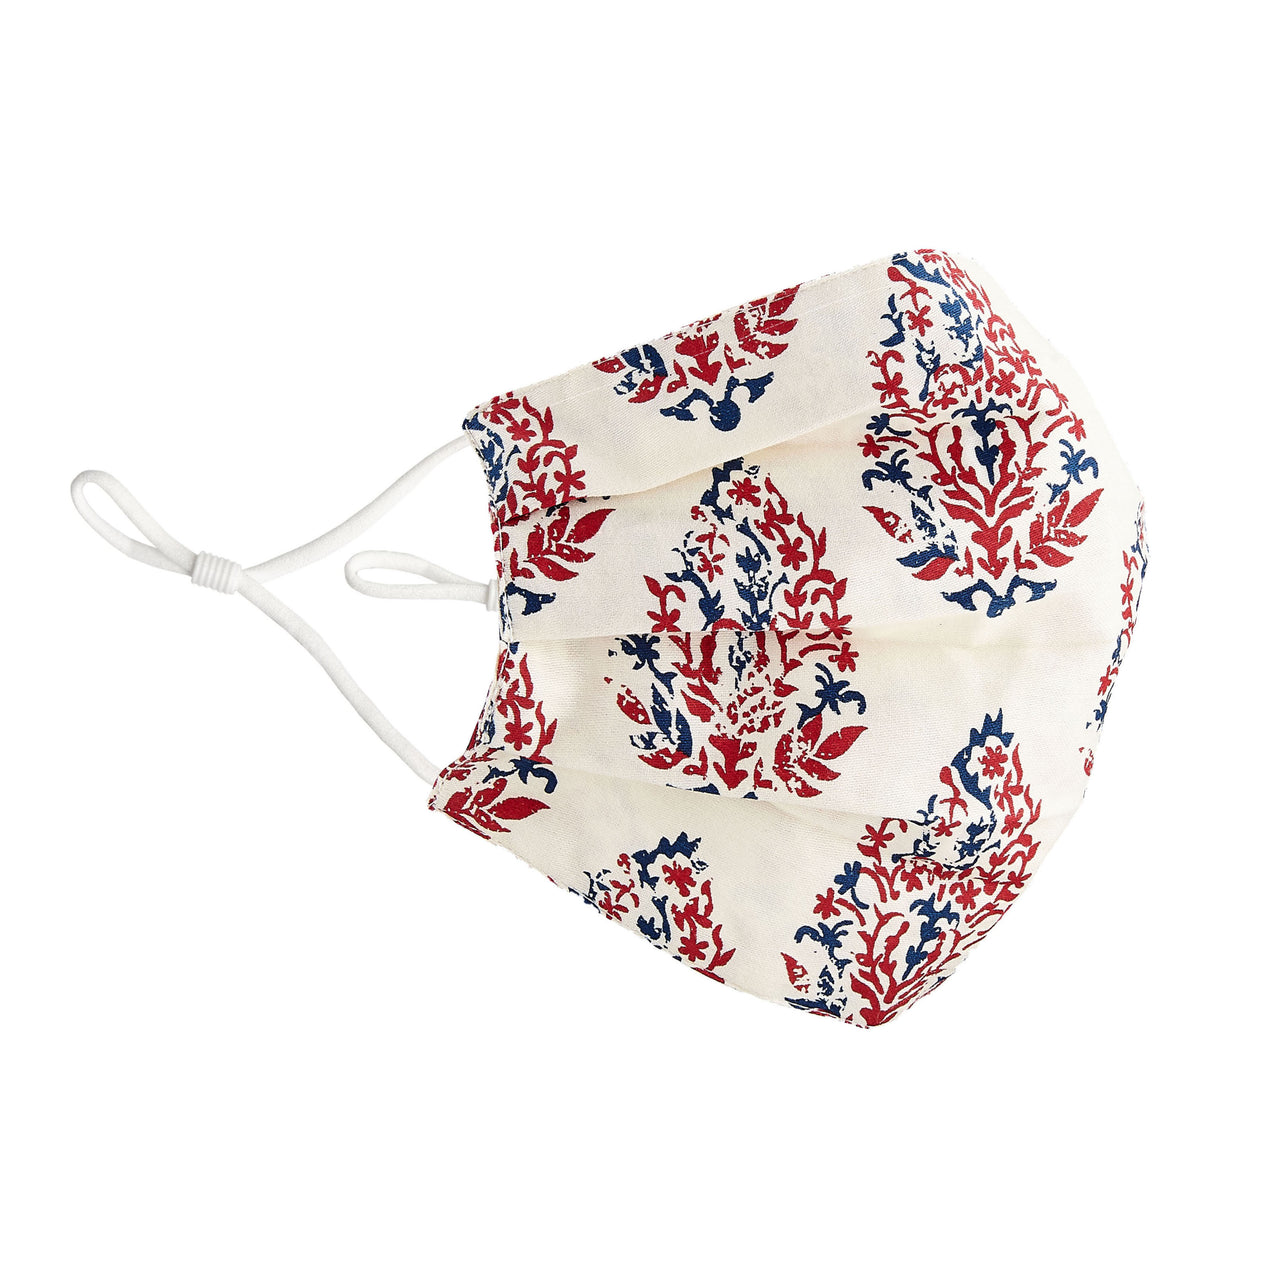 Cotton Face Mask, Red/Blue Paisley